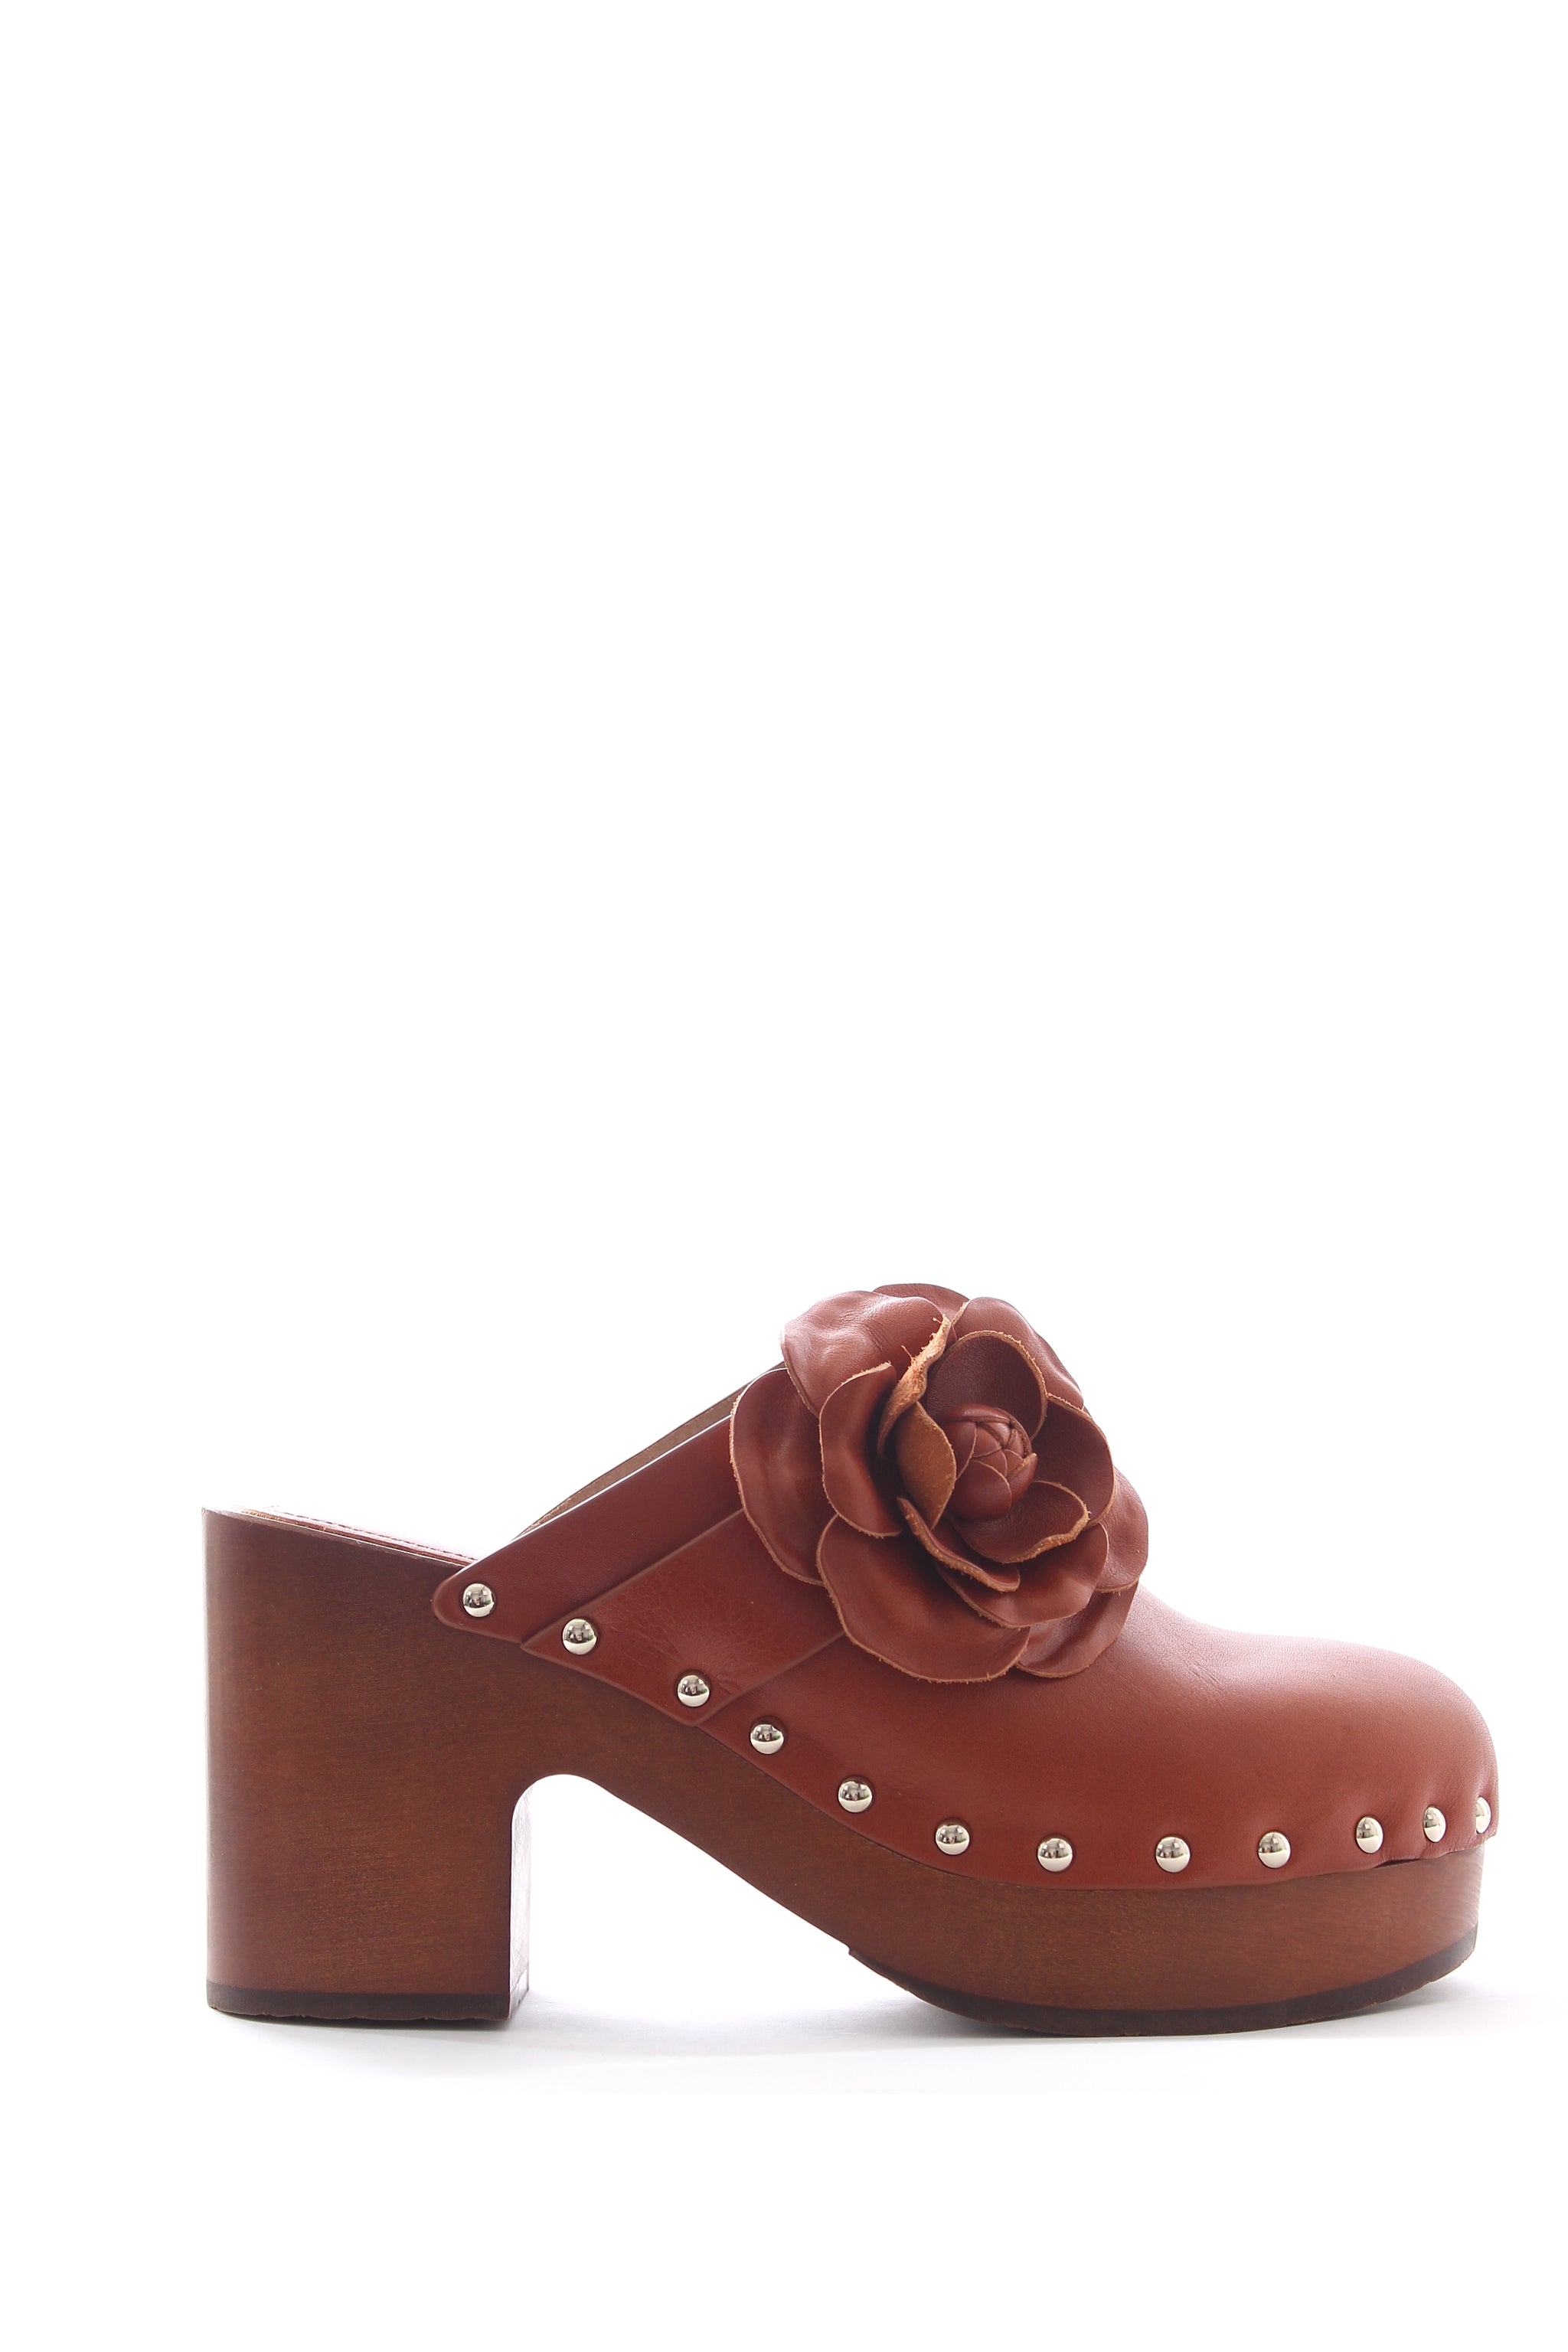 chanel leather clogs mules